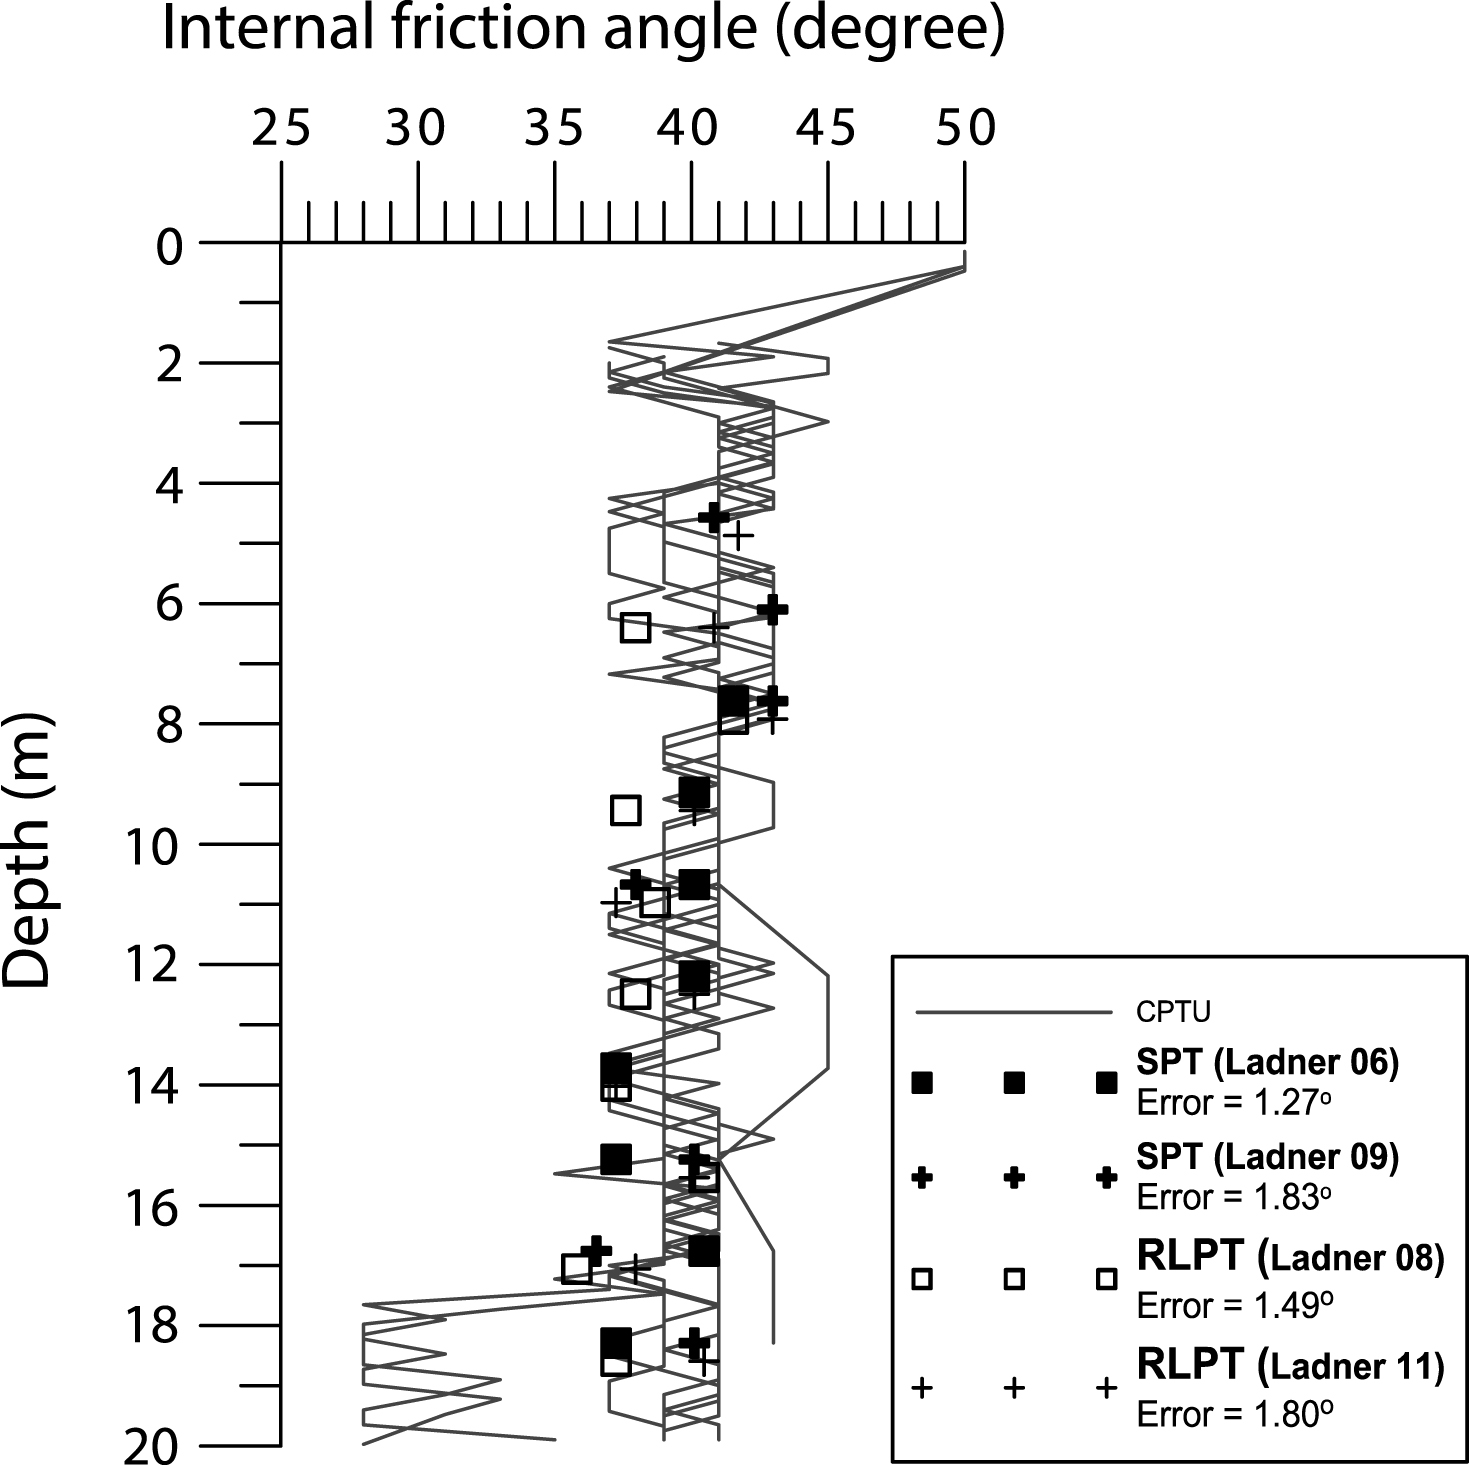 Internal friction angle from SPT, RLP and CPTU.